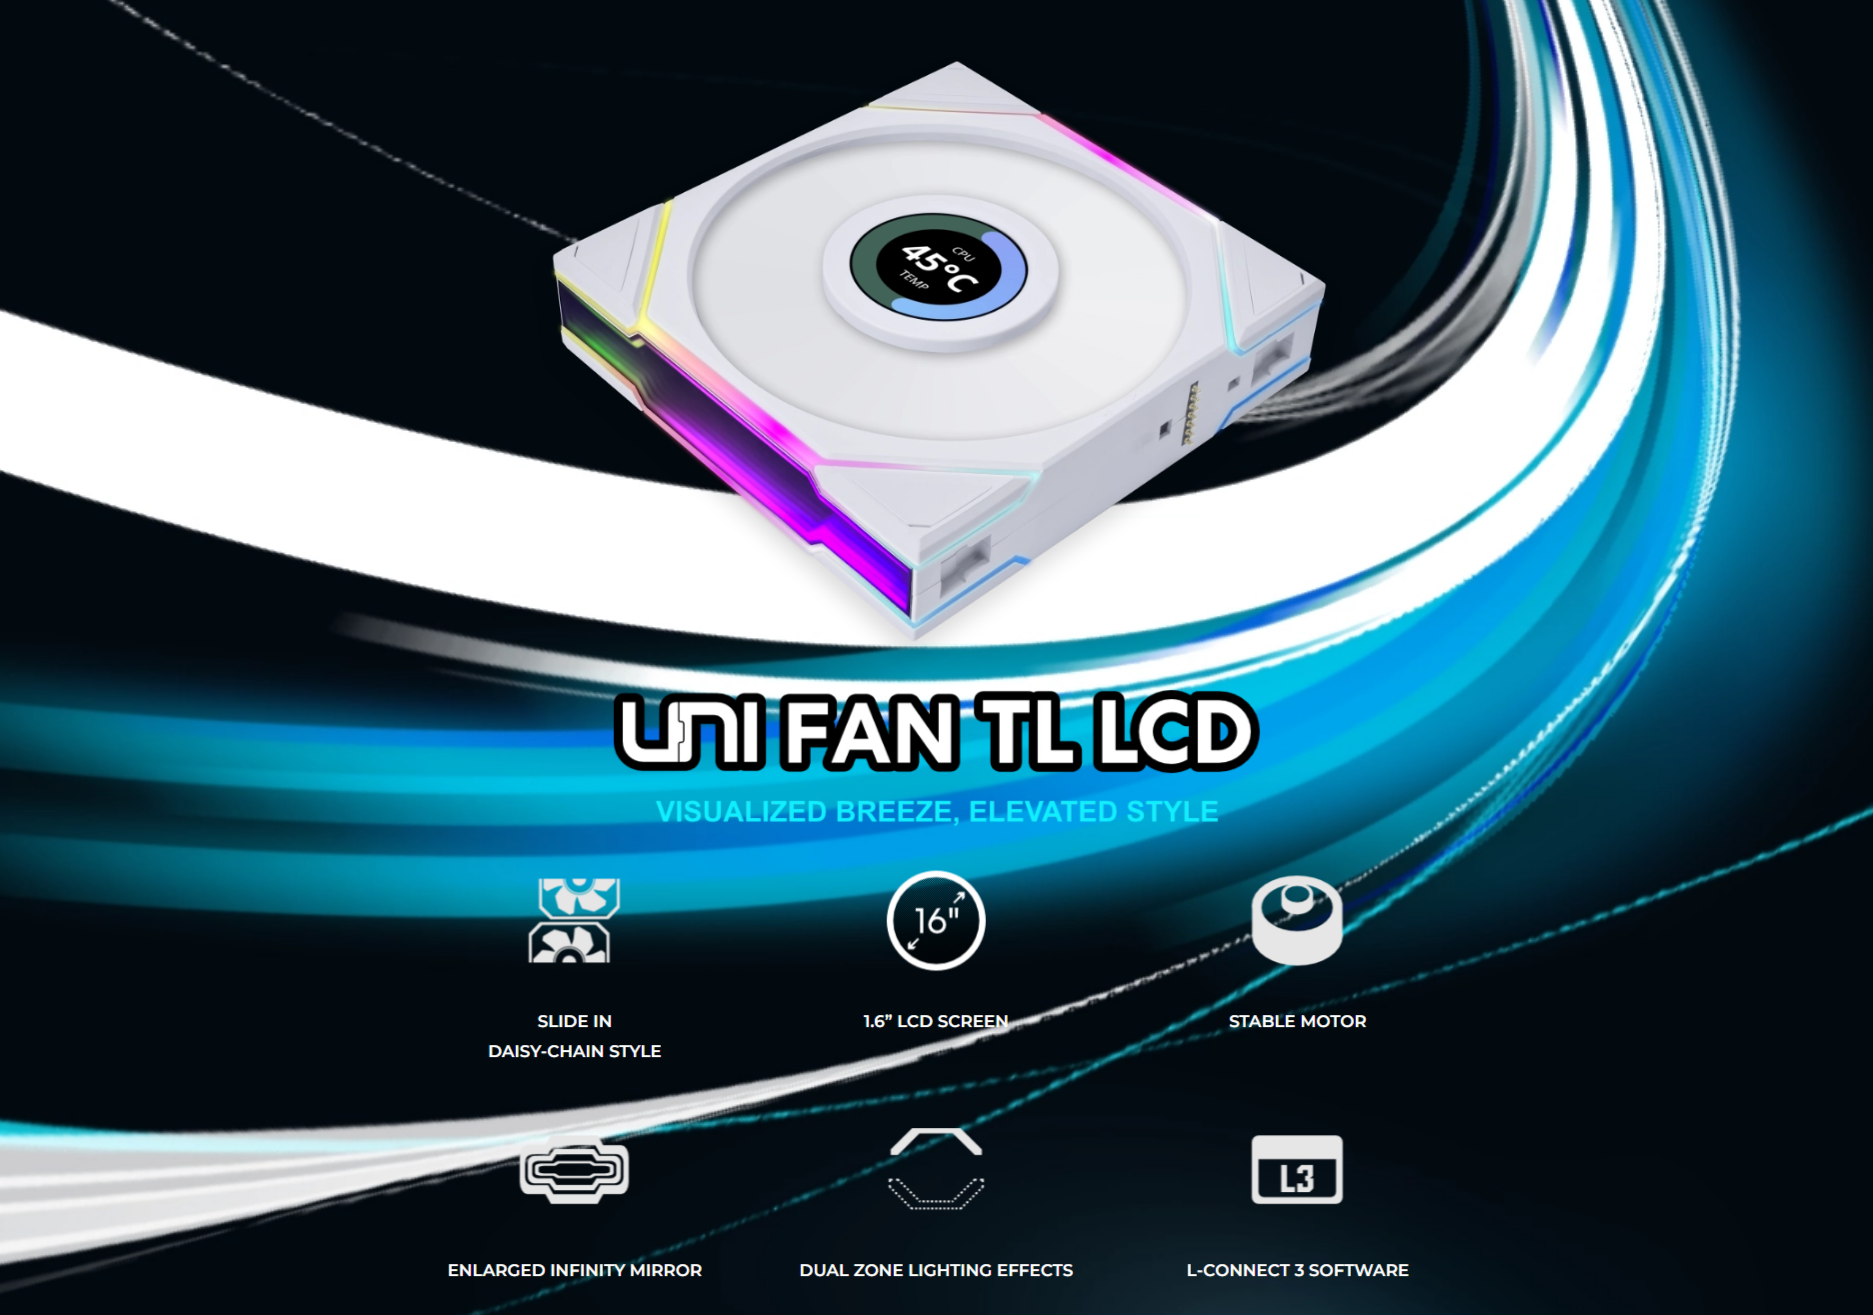 A large marketing image providing additional information about the product Lian Li UNI Fan TL LCD 140 140mm Fan Single Pack - Black - Additional alt info not provided